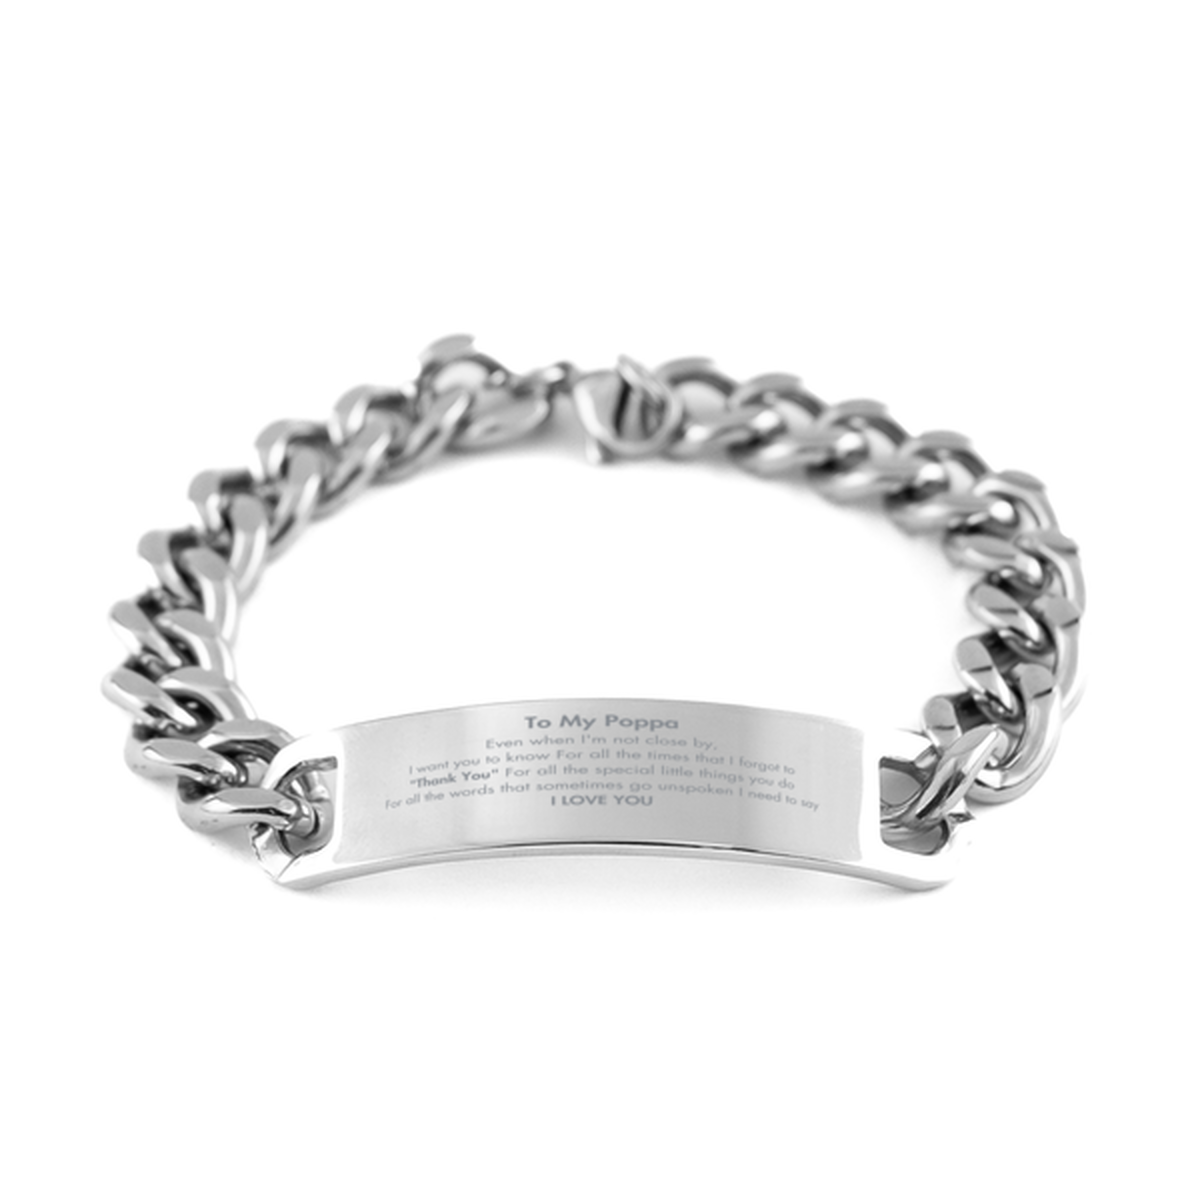 Thank You Gifts for Poppa, Keepsake Cuban Chain Stainless Steel Bracelet Gifts for Poppa Birthday Mother's day Father's Day Poppa For all the words That sometimes go unspoken I need to say I LOVE YOU